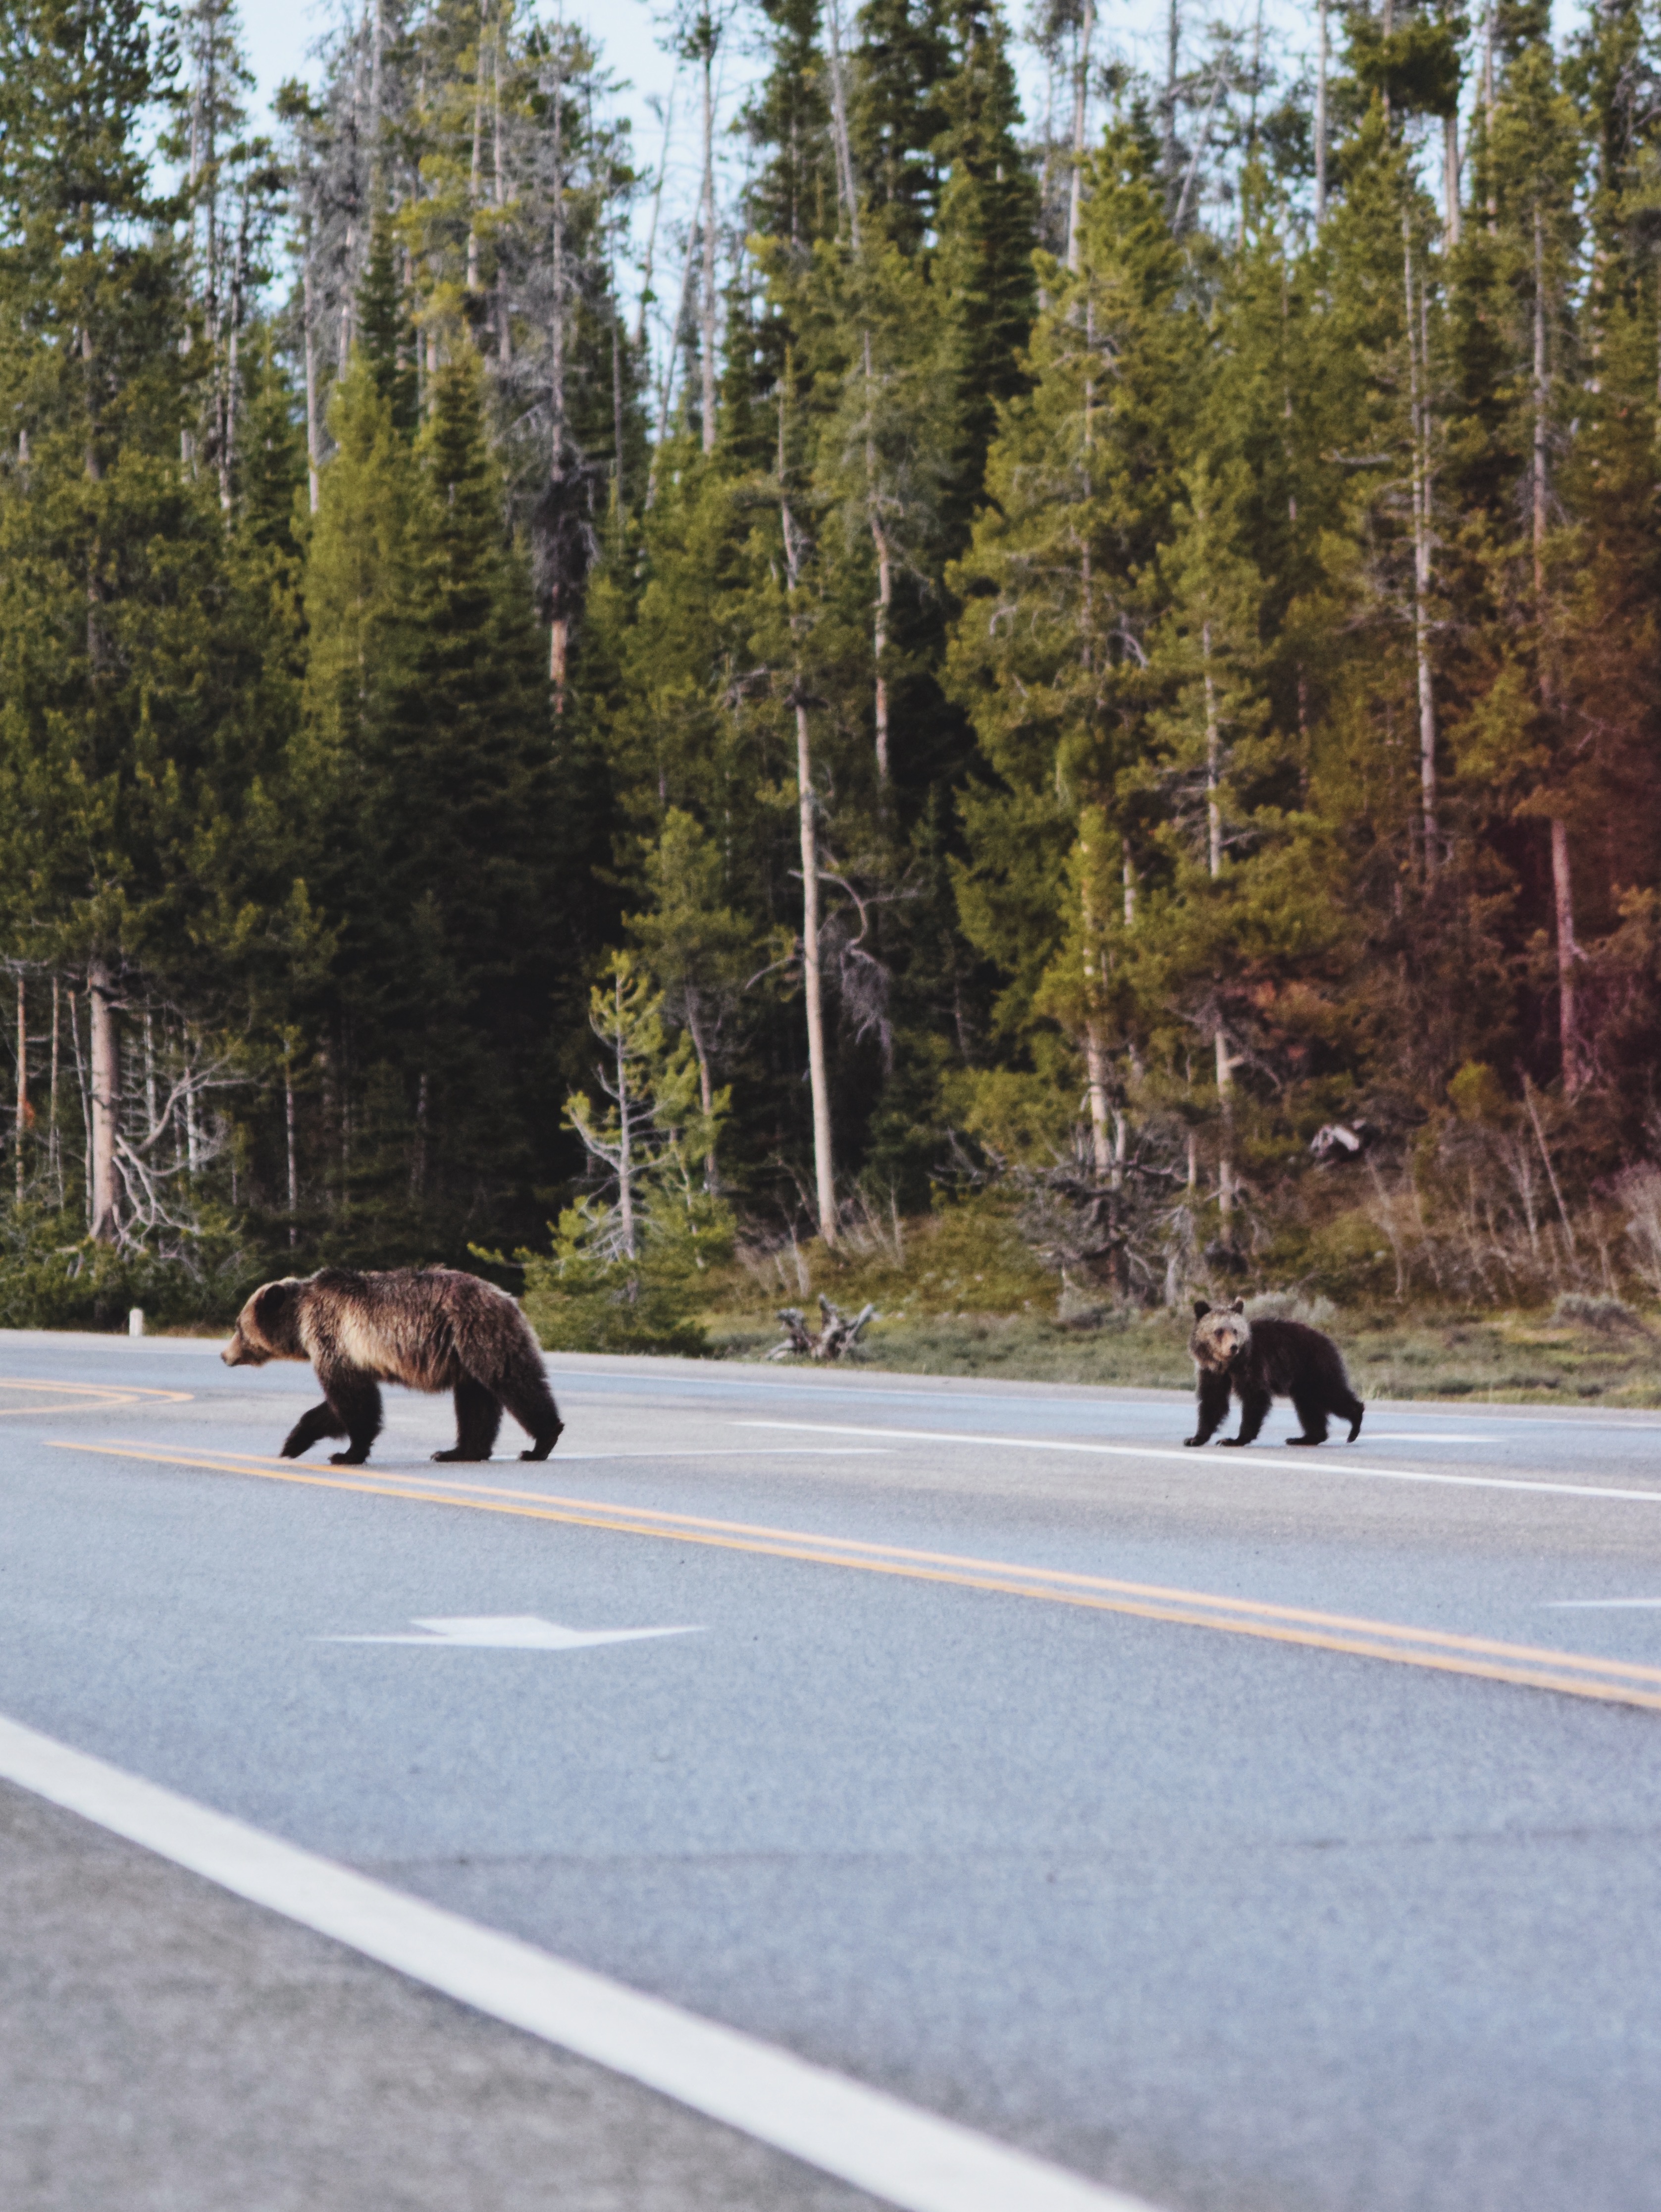 grizzly mom and cub crossing a road in a pine forest